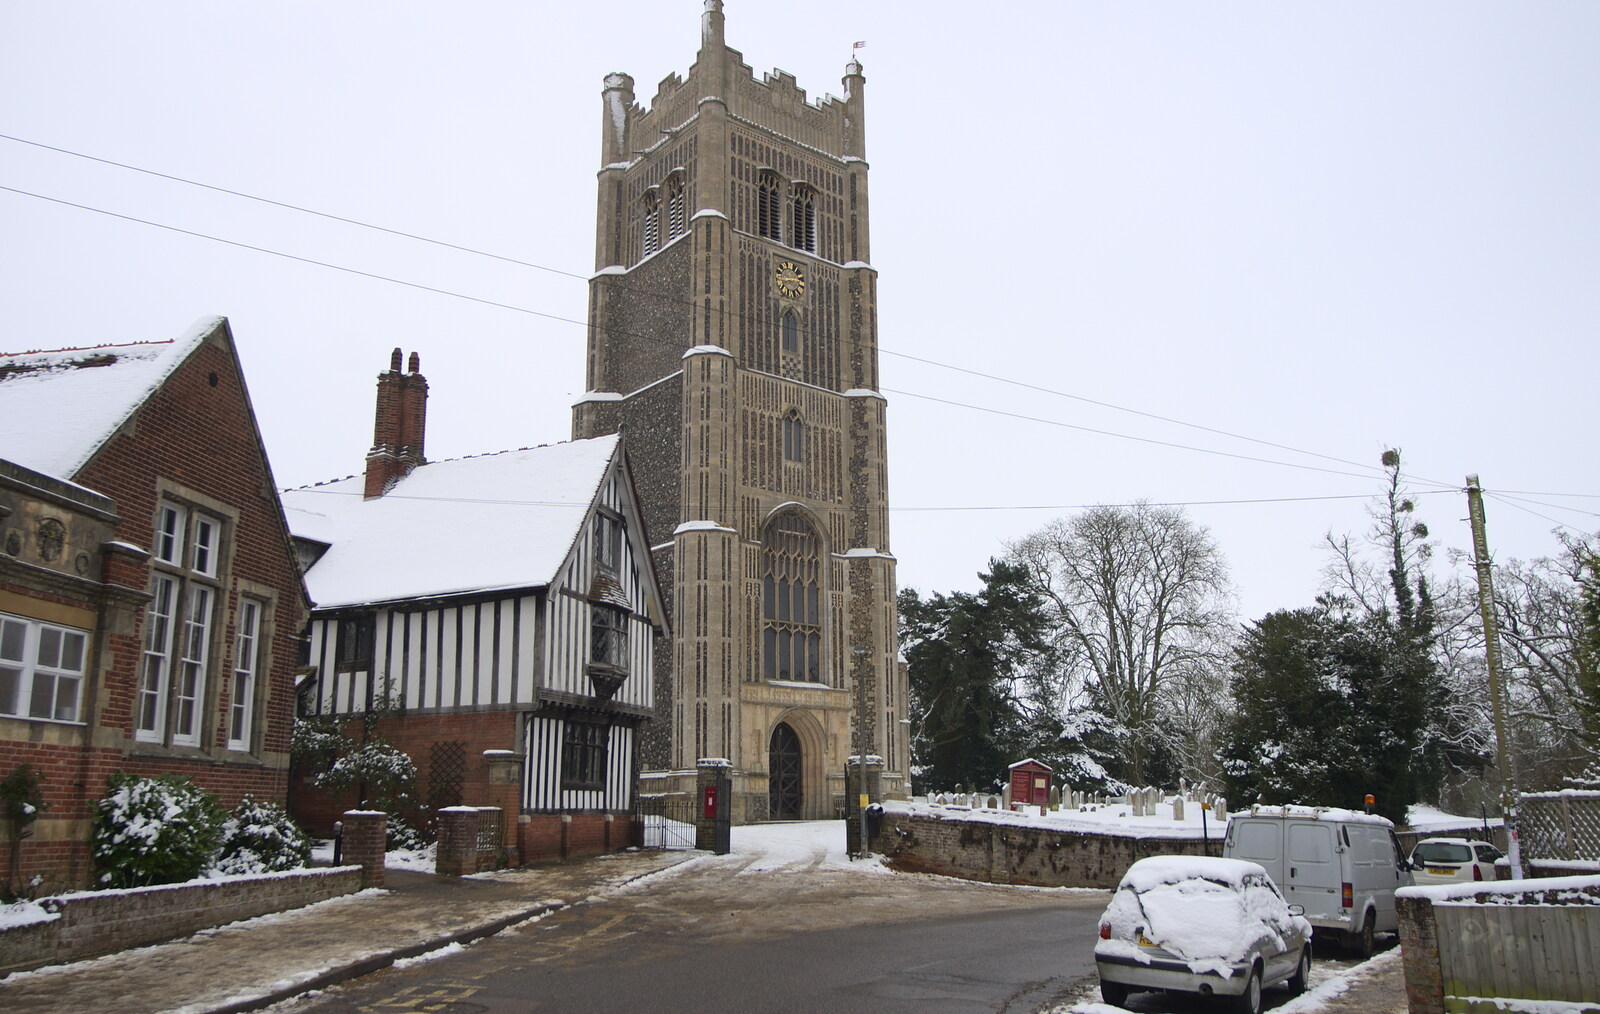 More Snow Days and a Wind Turbine is Built, Brome, Suffolk - 19th January 2013: The church in Eye